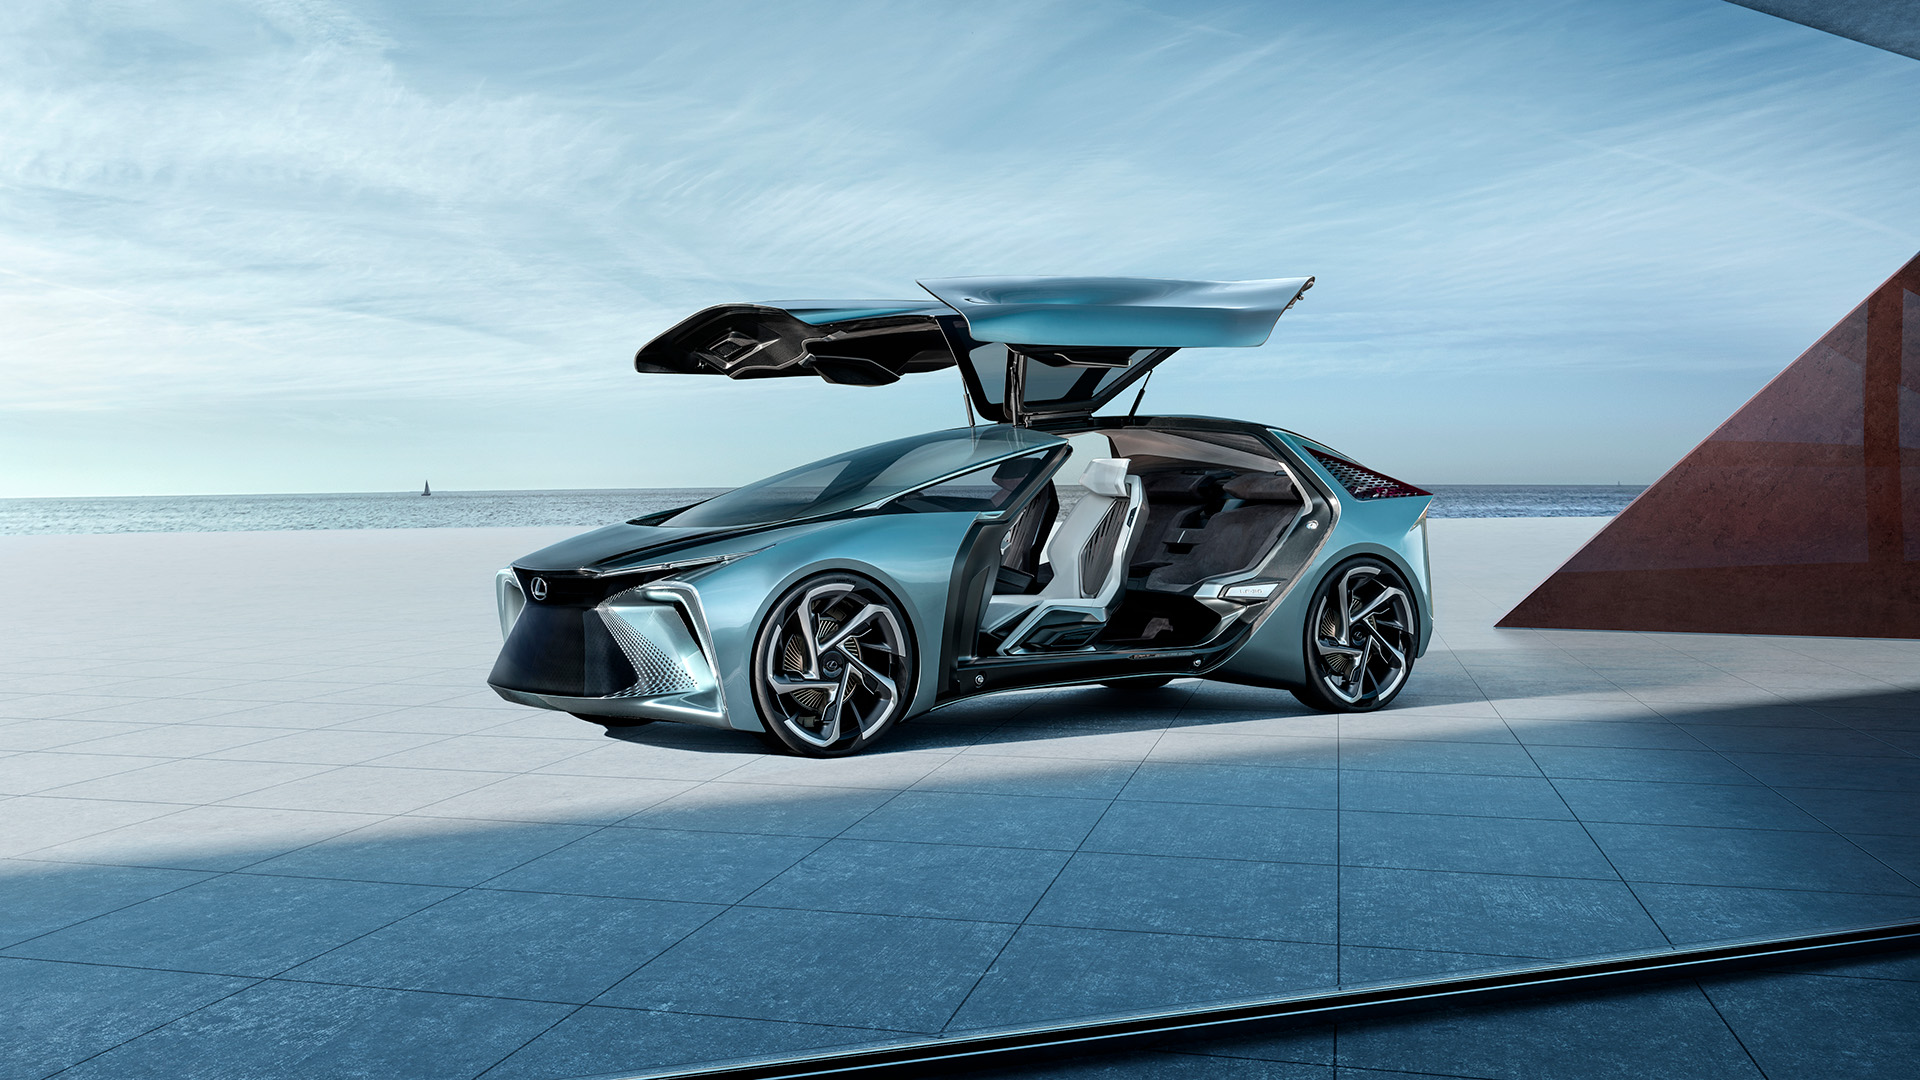 Concept vehicle shown. Not available for purchase.